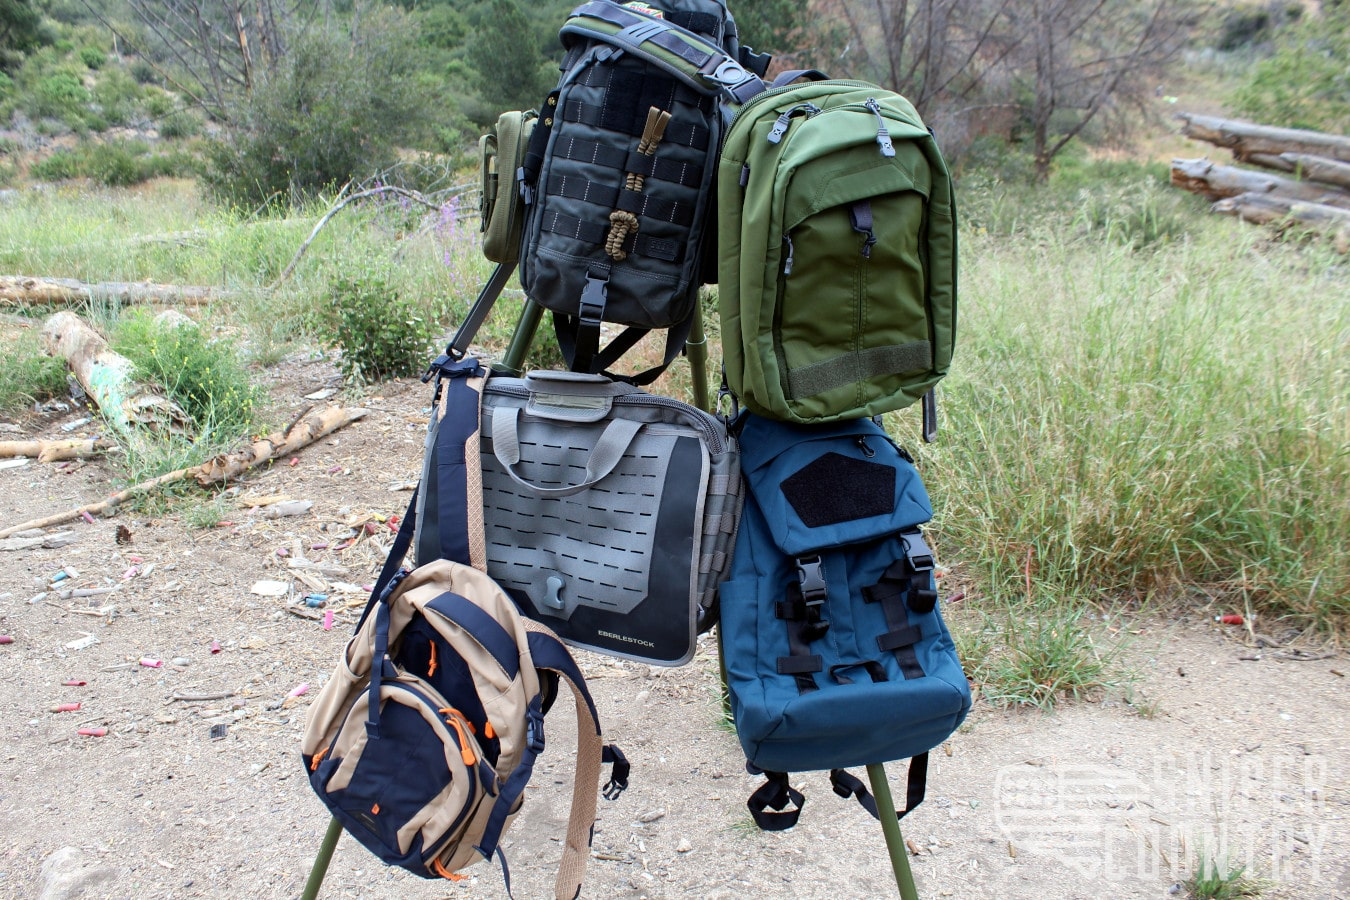 Different types of Concealed Carry Backpack    Photo Credit: Snipercountry.com